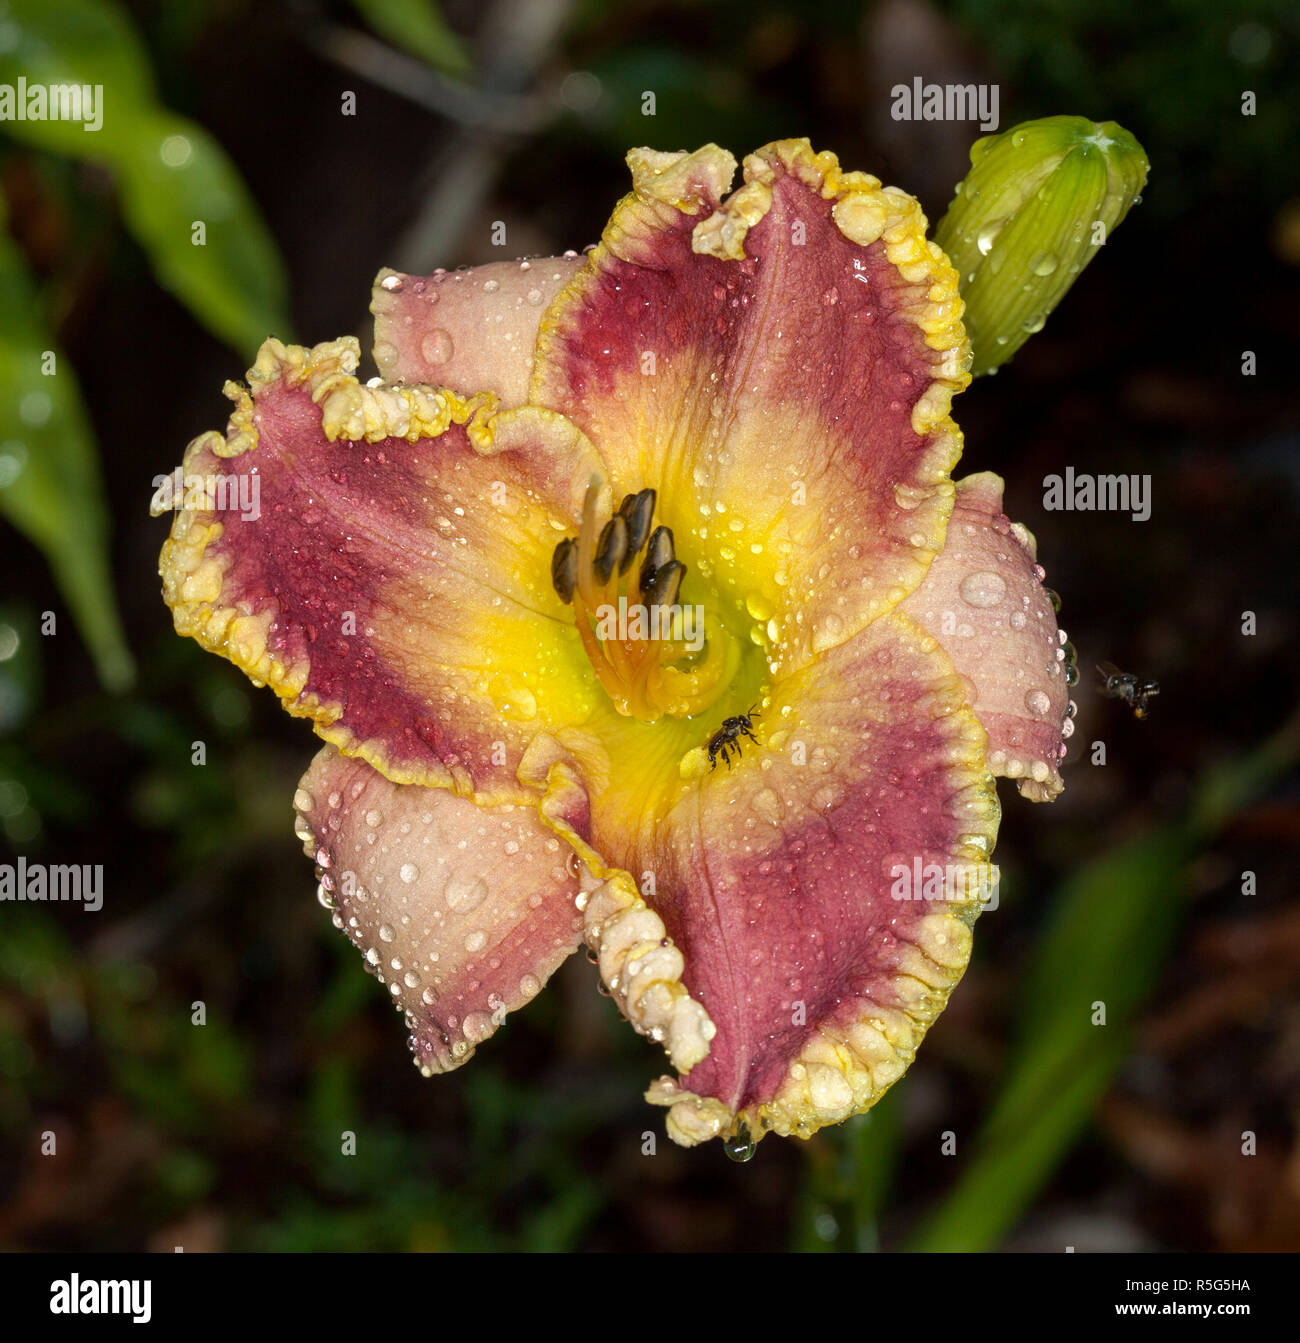 Spectacular red & yellow flower of daylily, Hemerocallis 'Alexa Kathryn', with raindrops & native bee on frilly edged petals against dark background Stock Photo